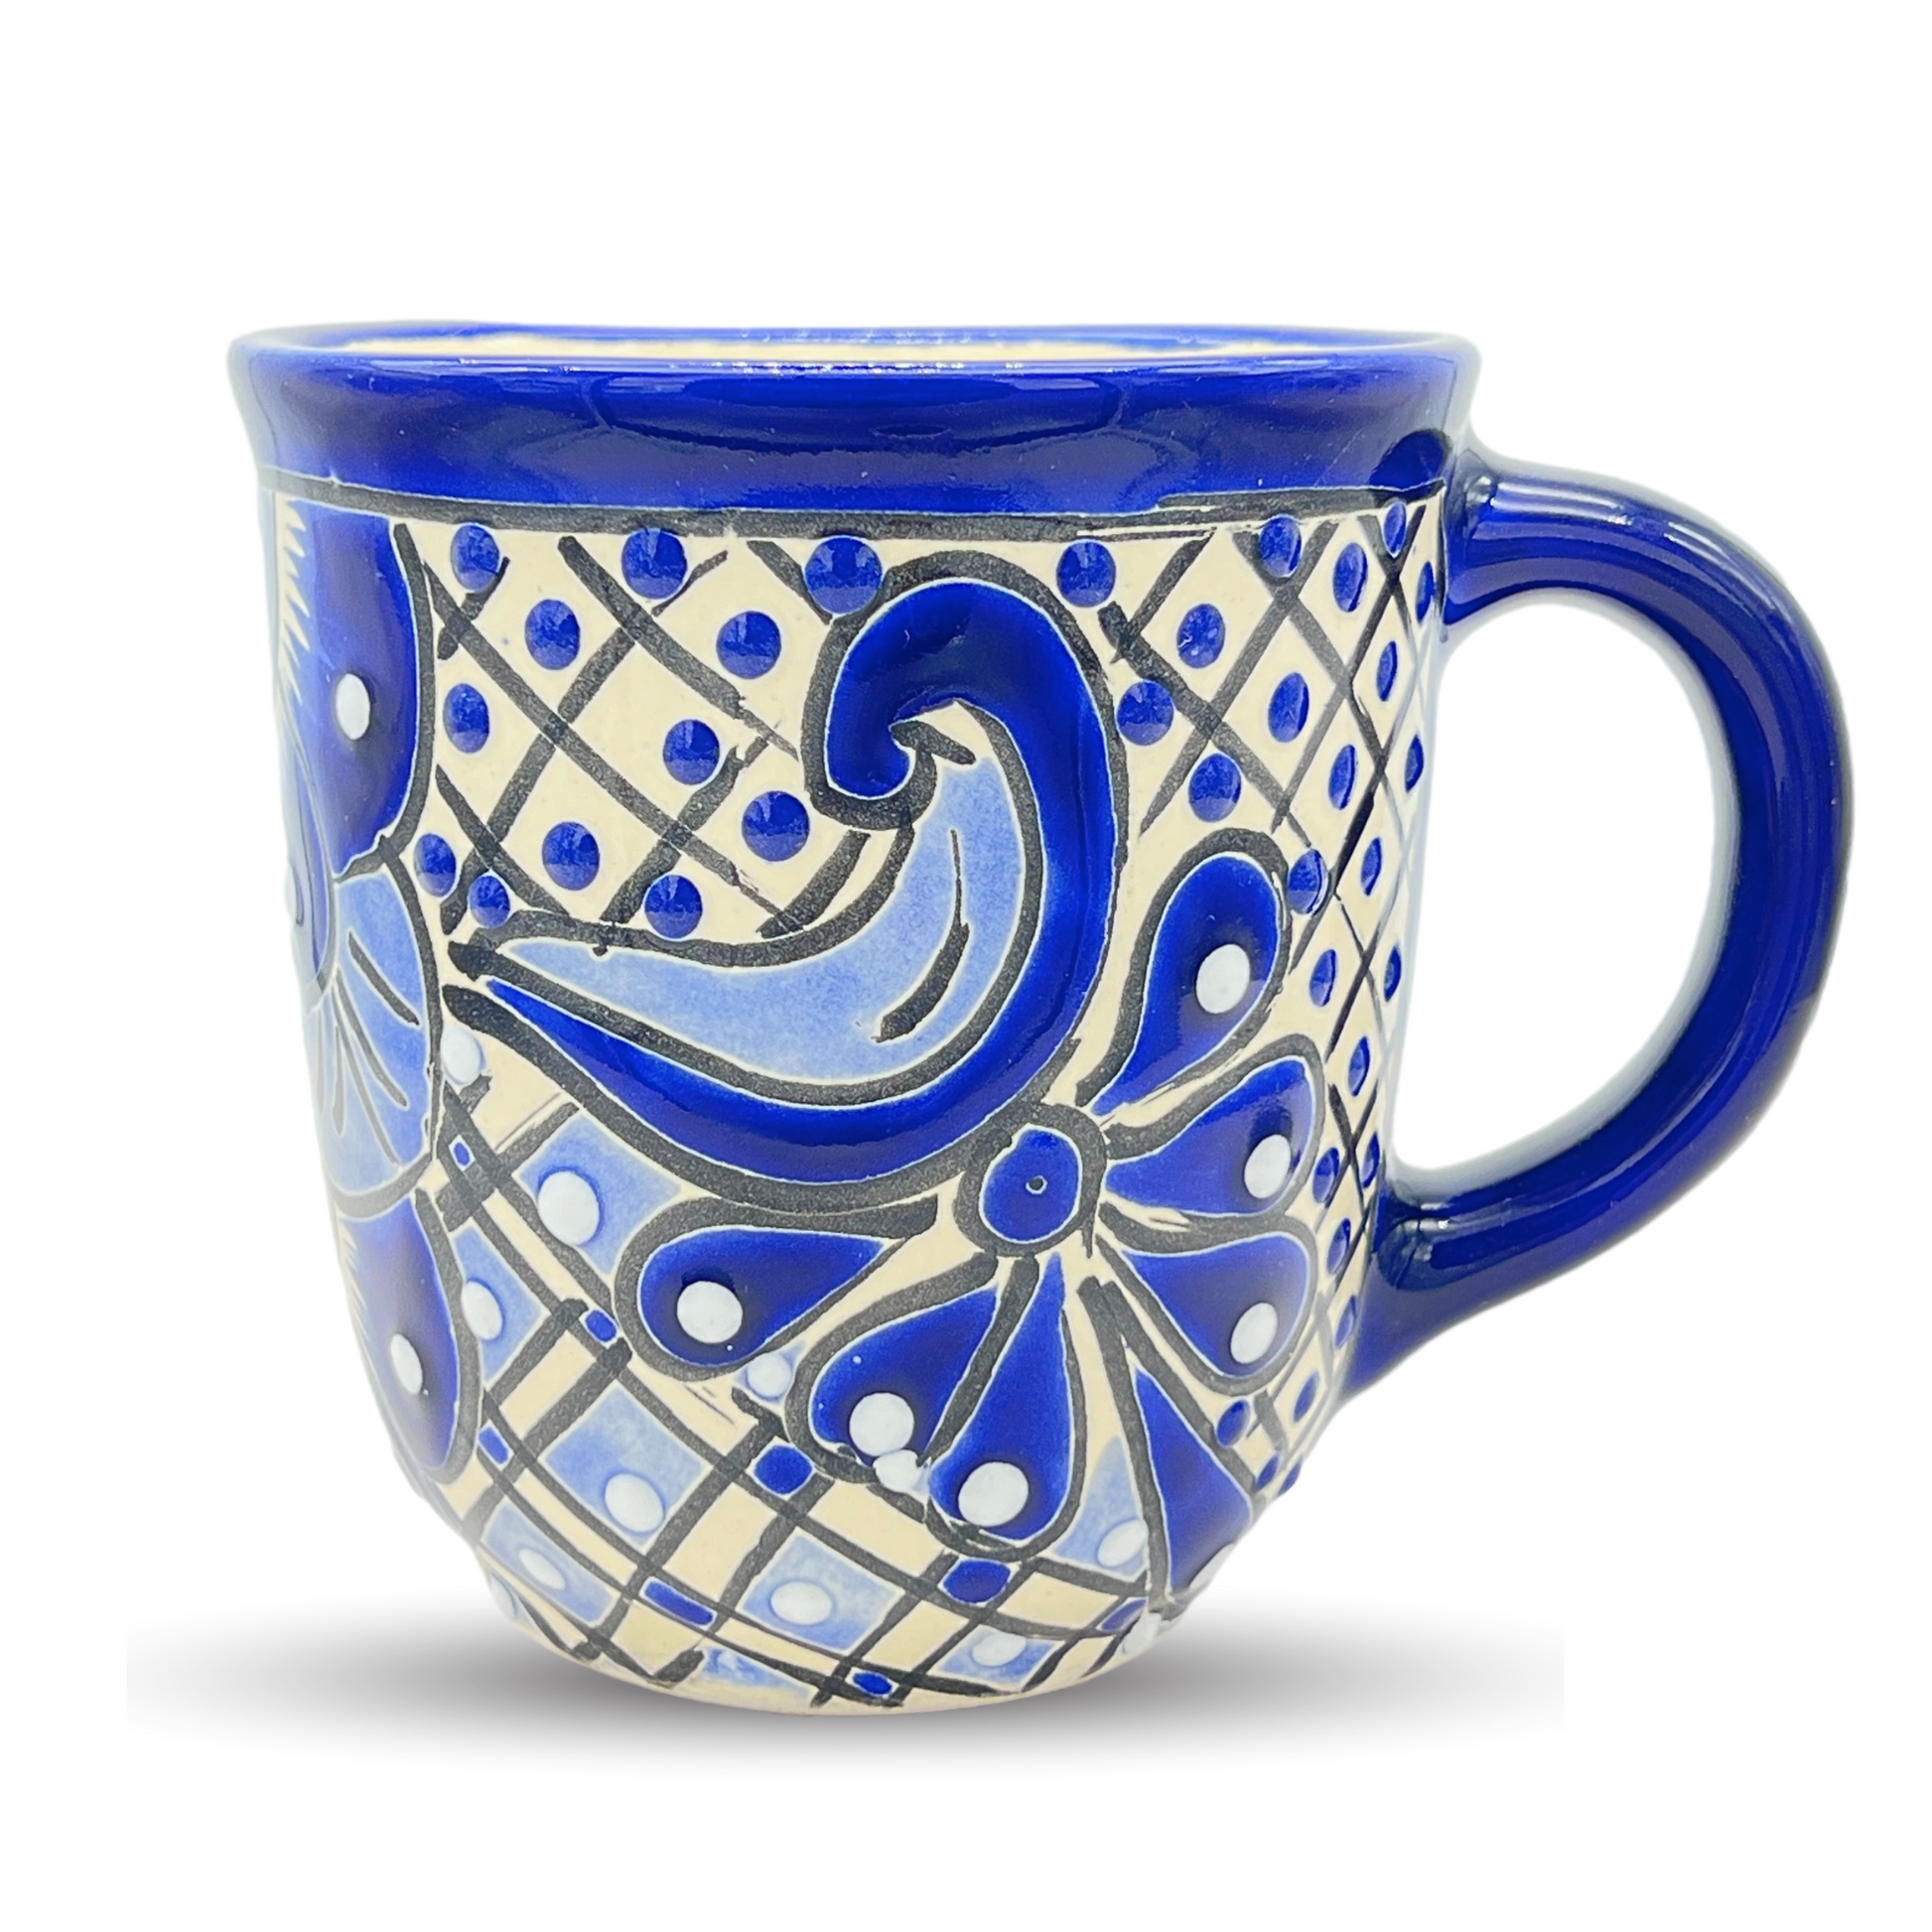 Enjoy your beverage with our Hand-Painted Talavera Coffee Mug. Authentic Mexican decor meets functionality. Perfect gift. Free Shipping!